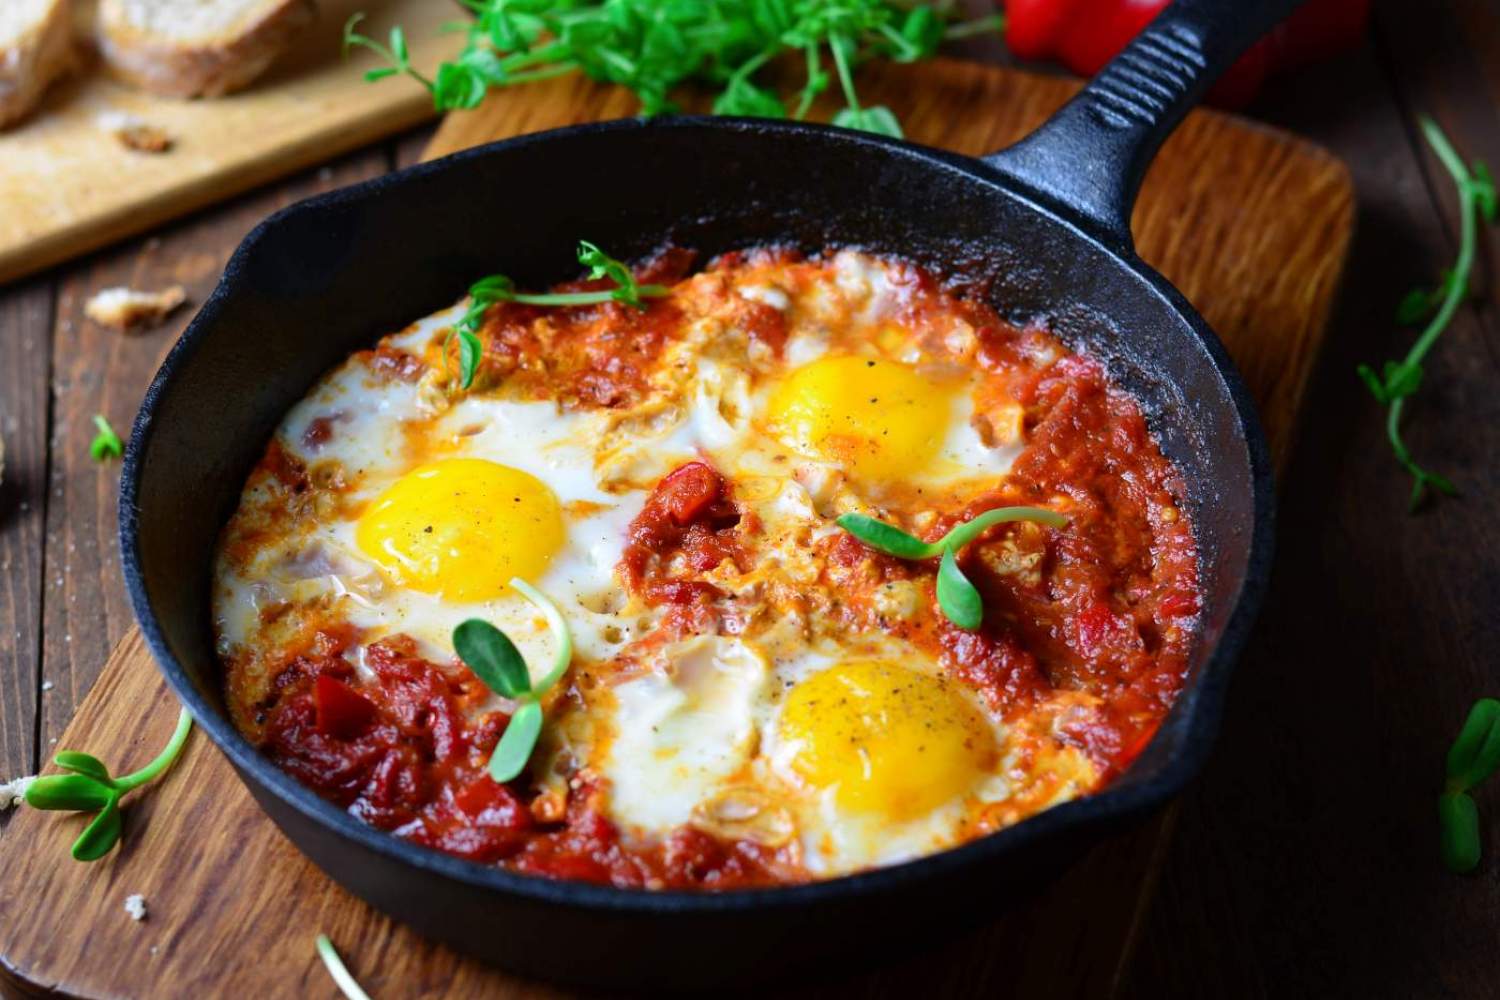 Baked Eggs with Tomatoes and Parmesan - Slender Kitchen